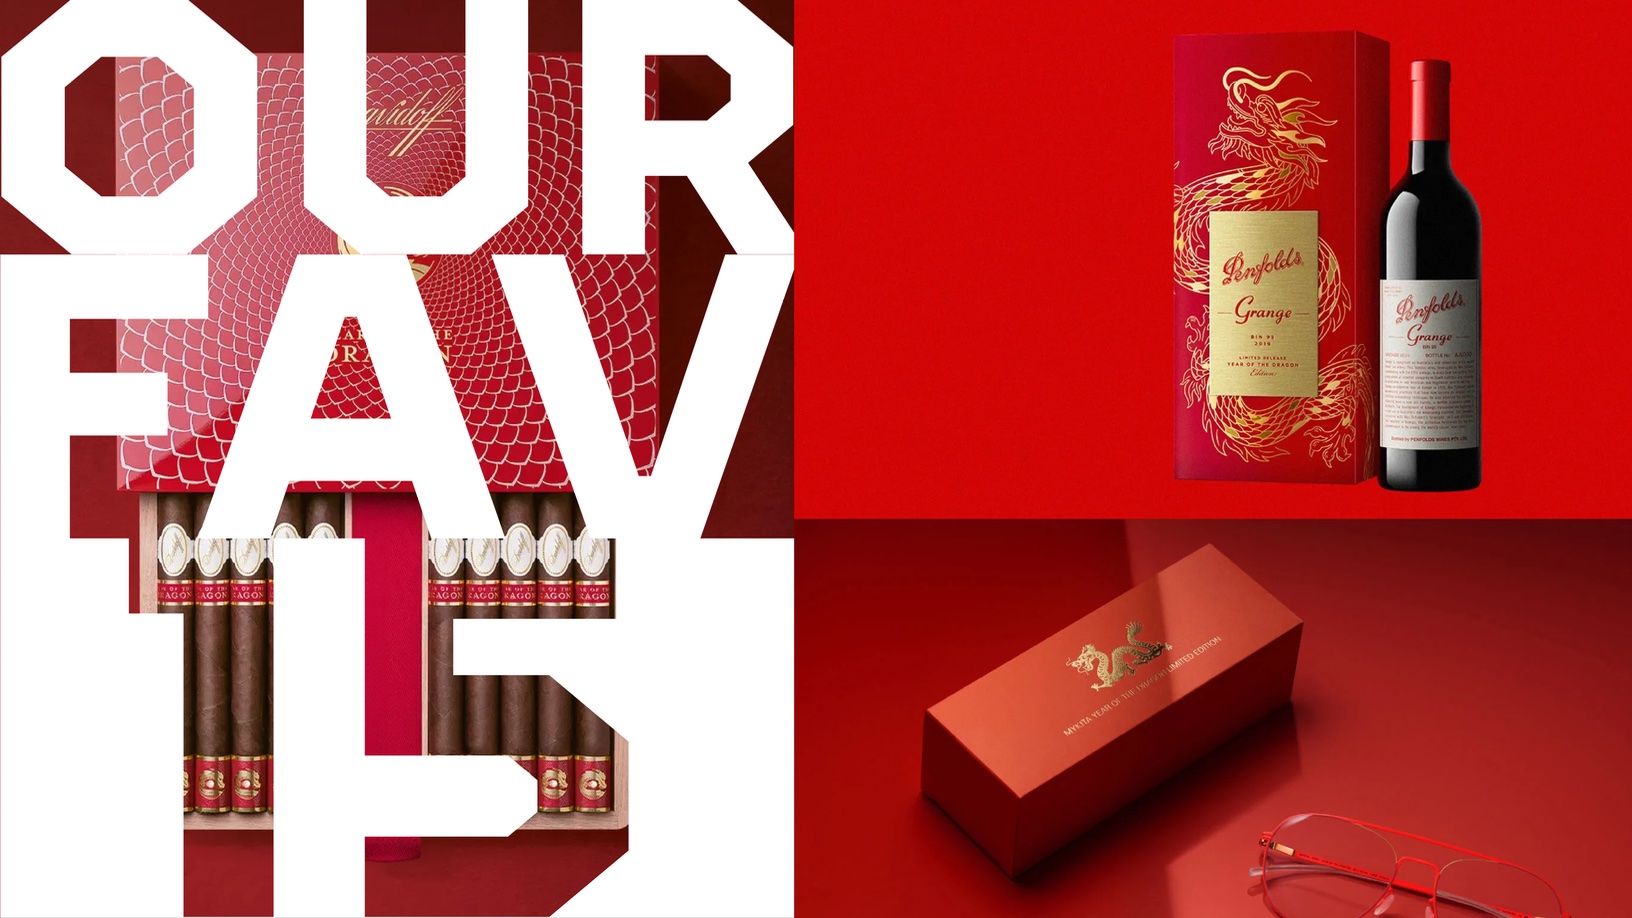 The Year of the Dragon Brings Plenty of Gorgeous Limited-Edition Lunar New Year Packaging Designs